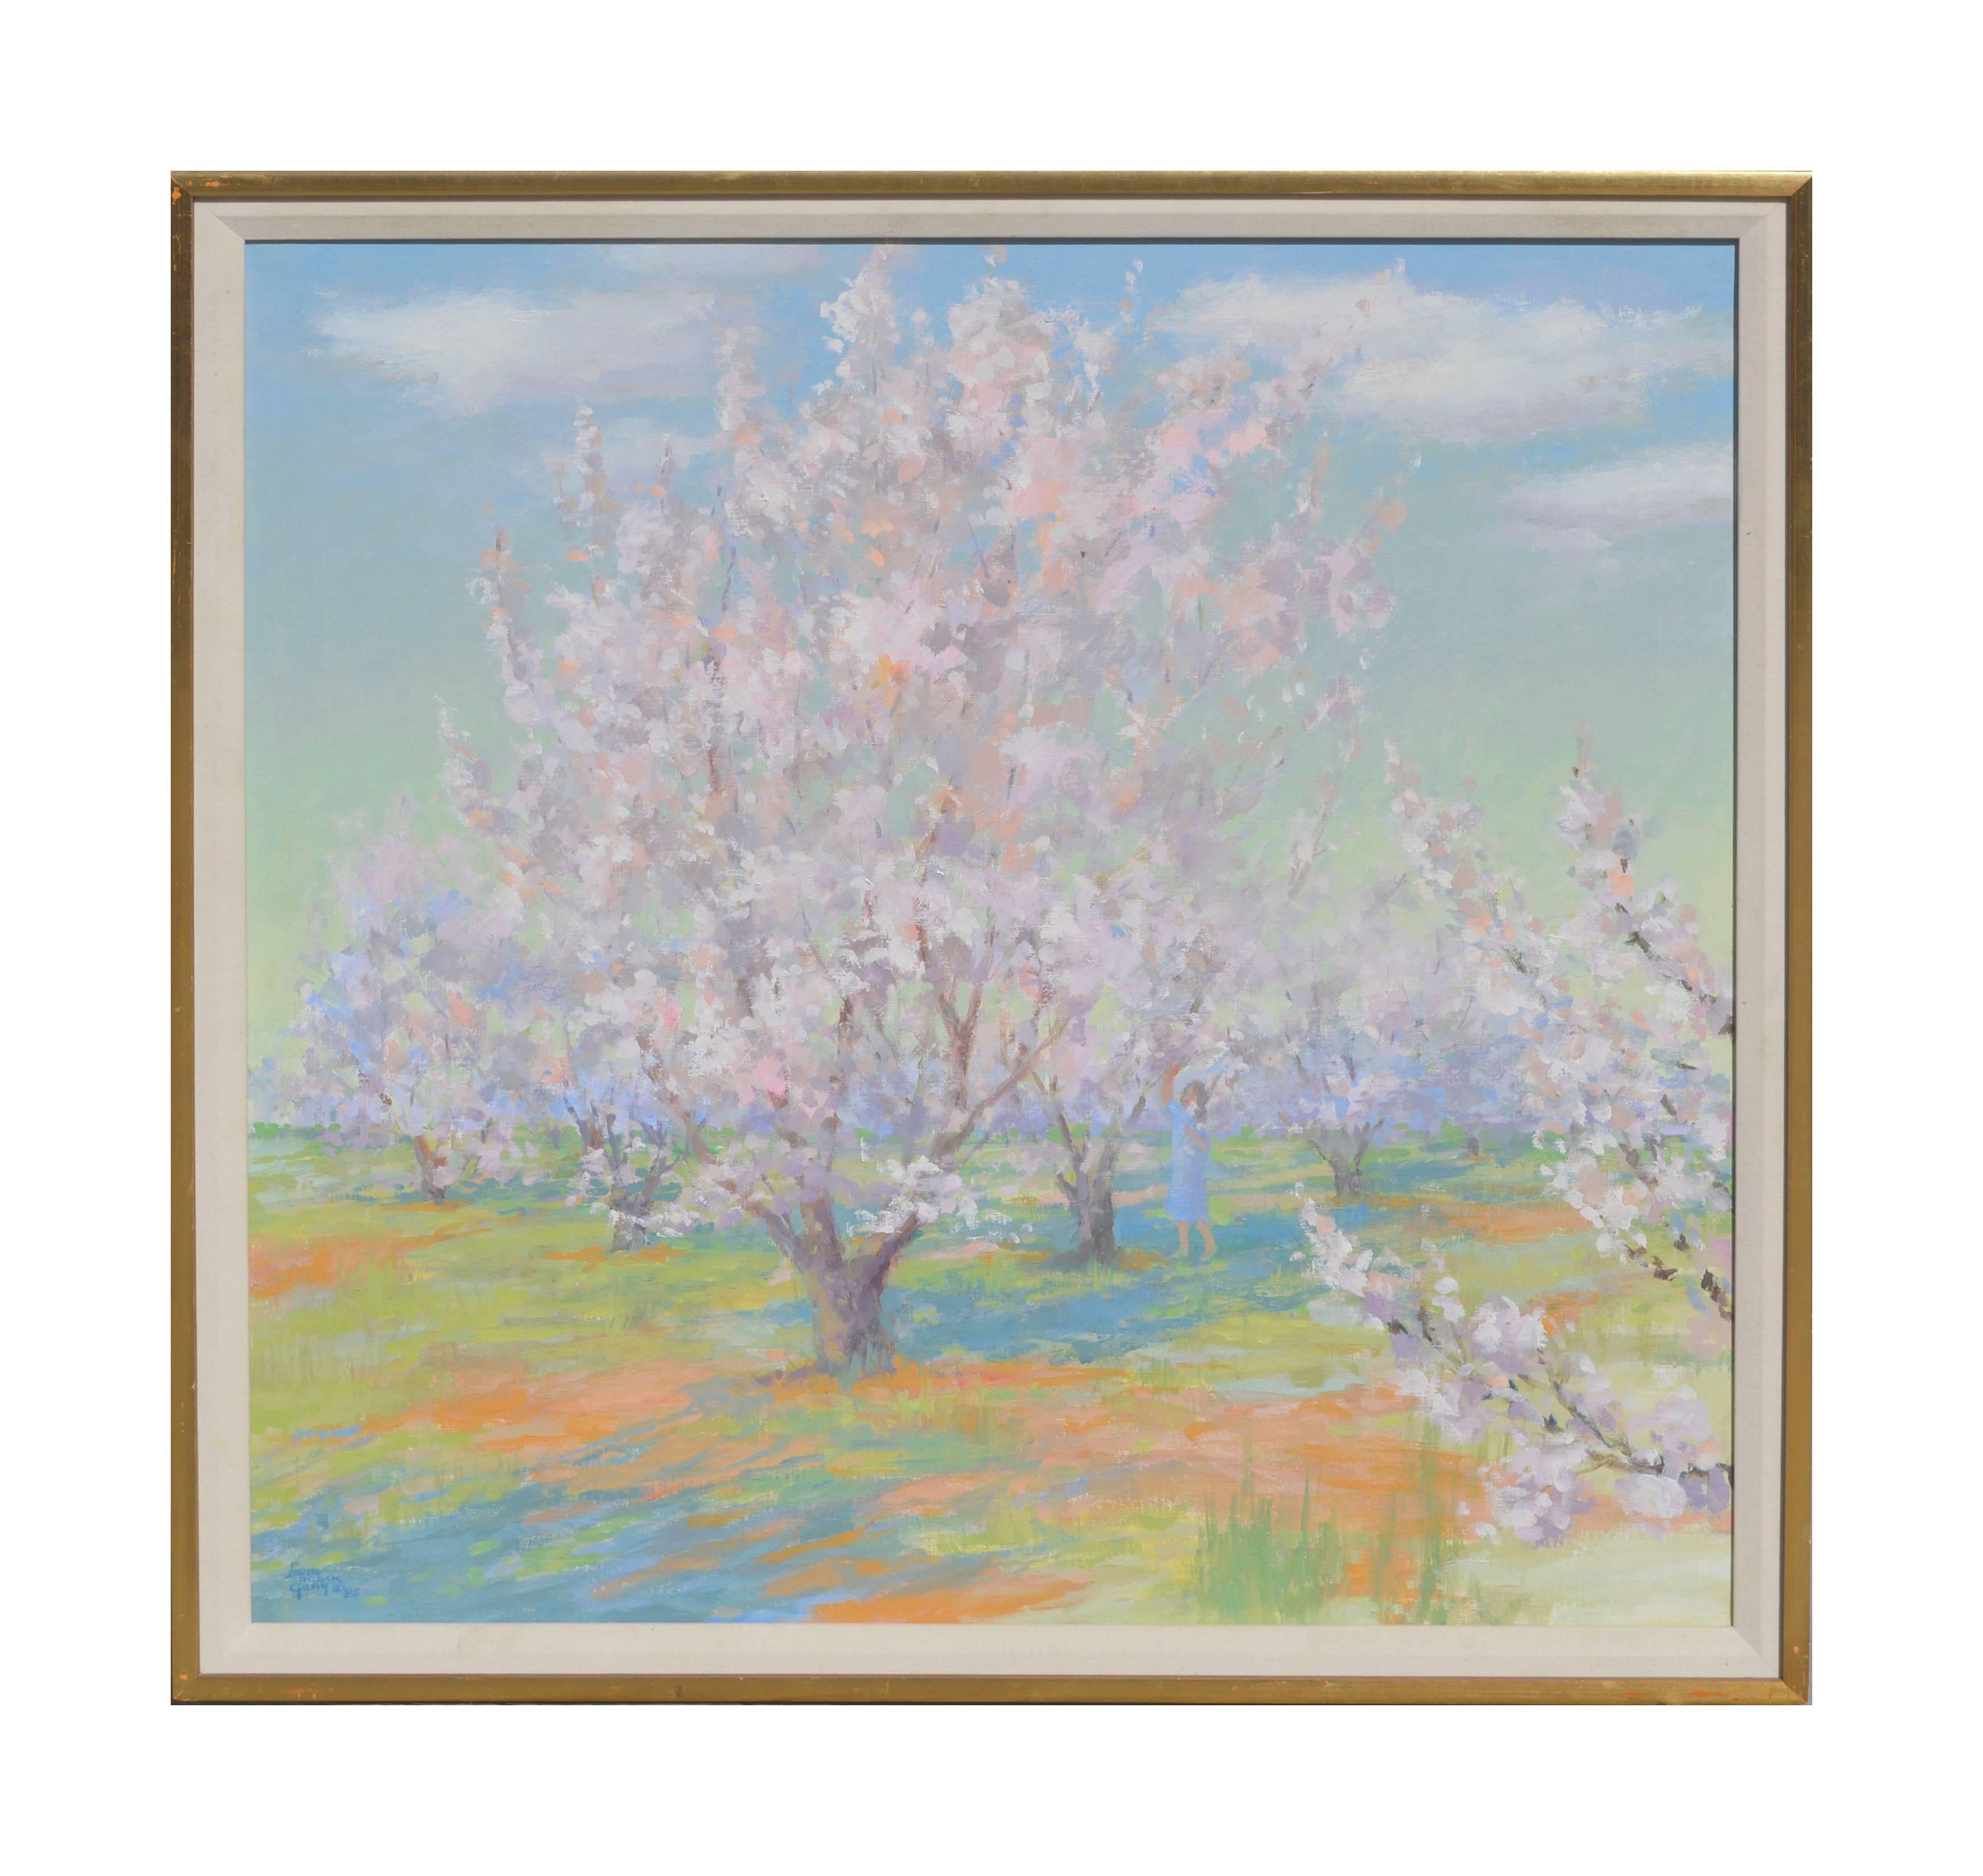 Louise Noack Gray Landscape Painting - Gathering Blossoms